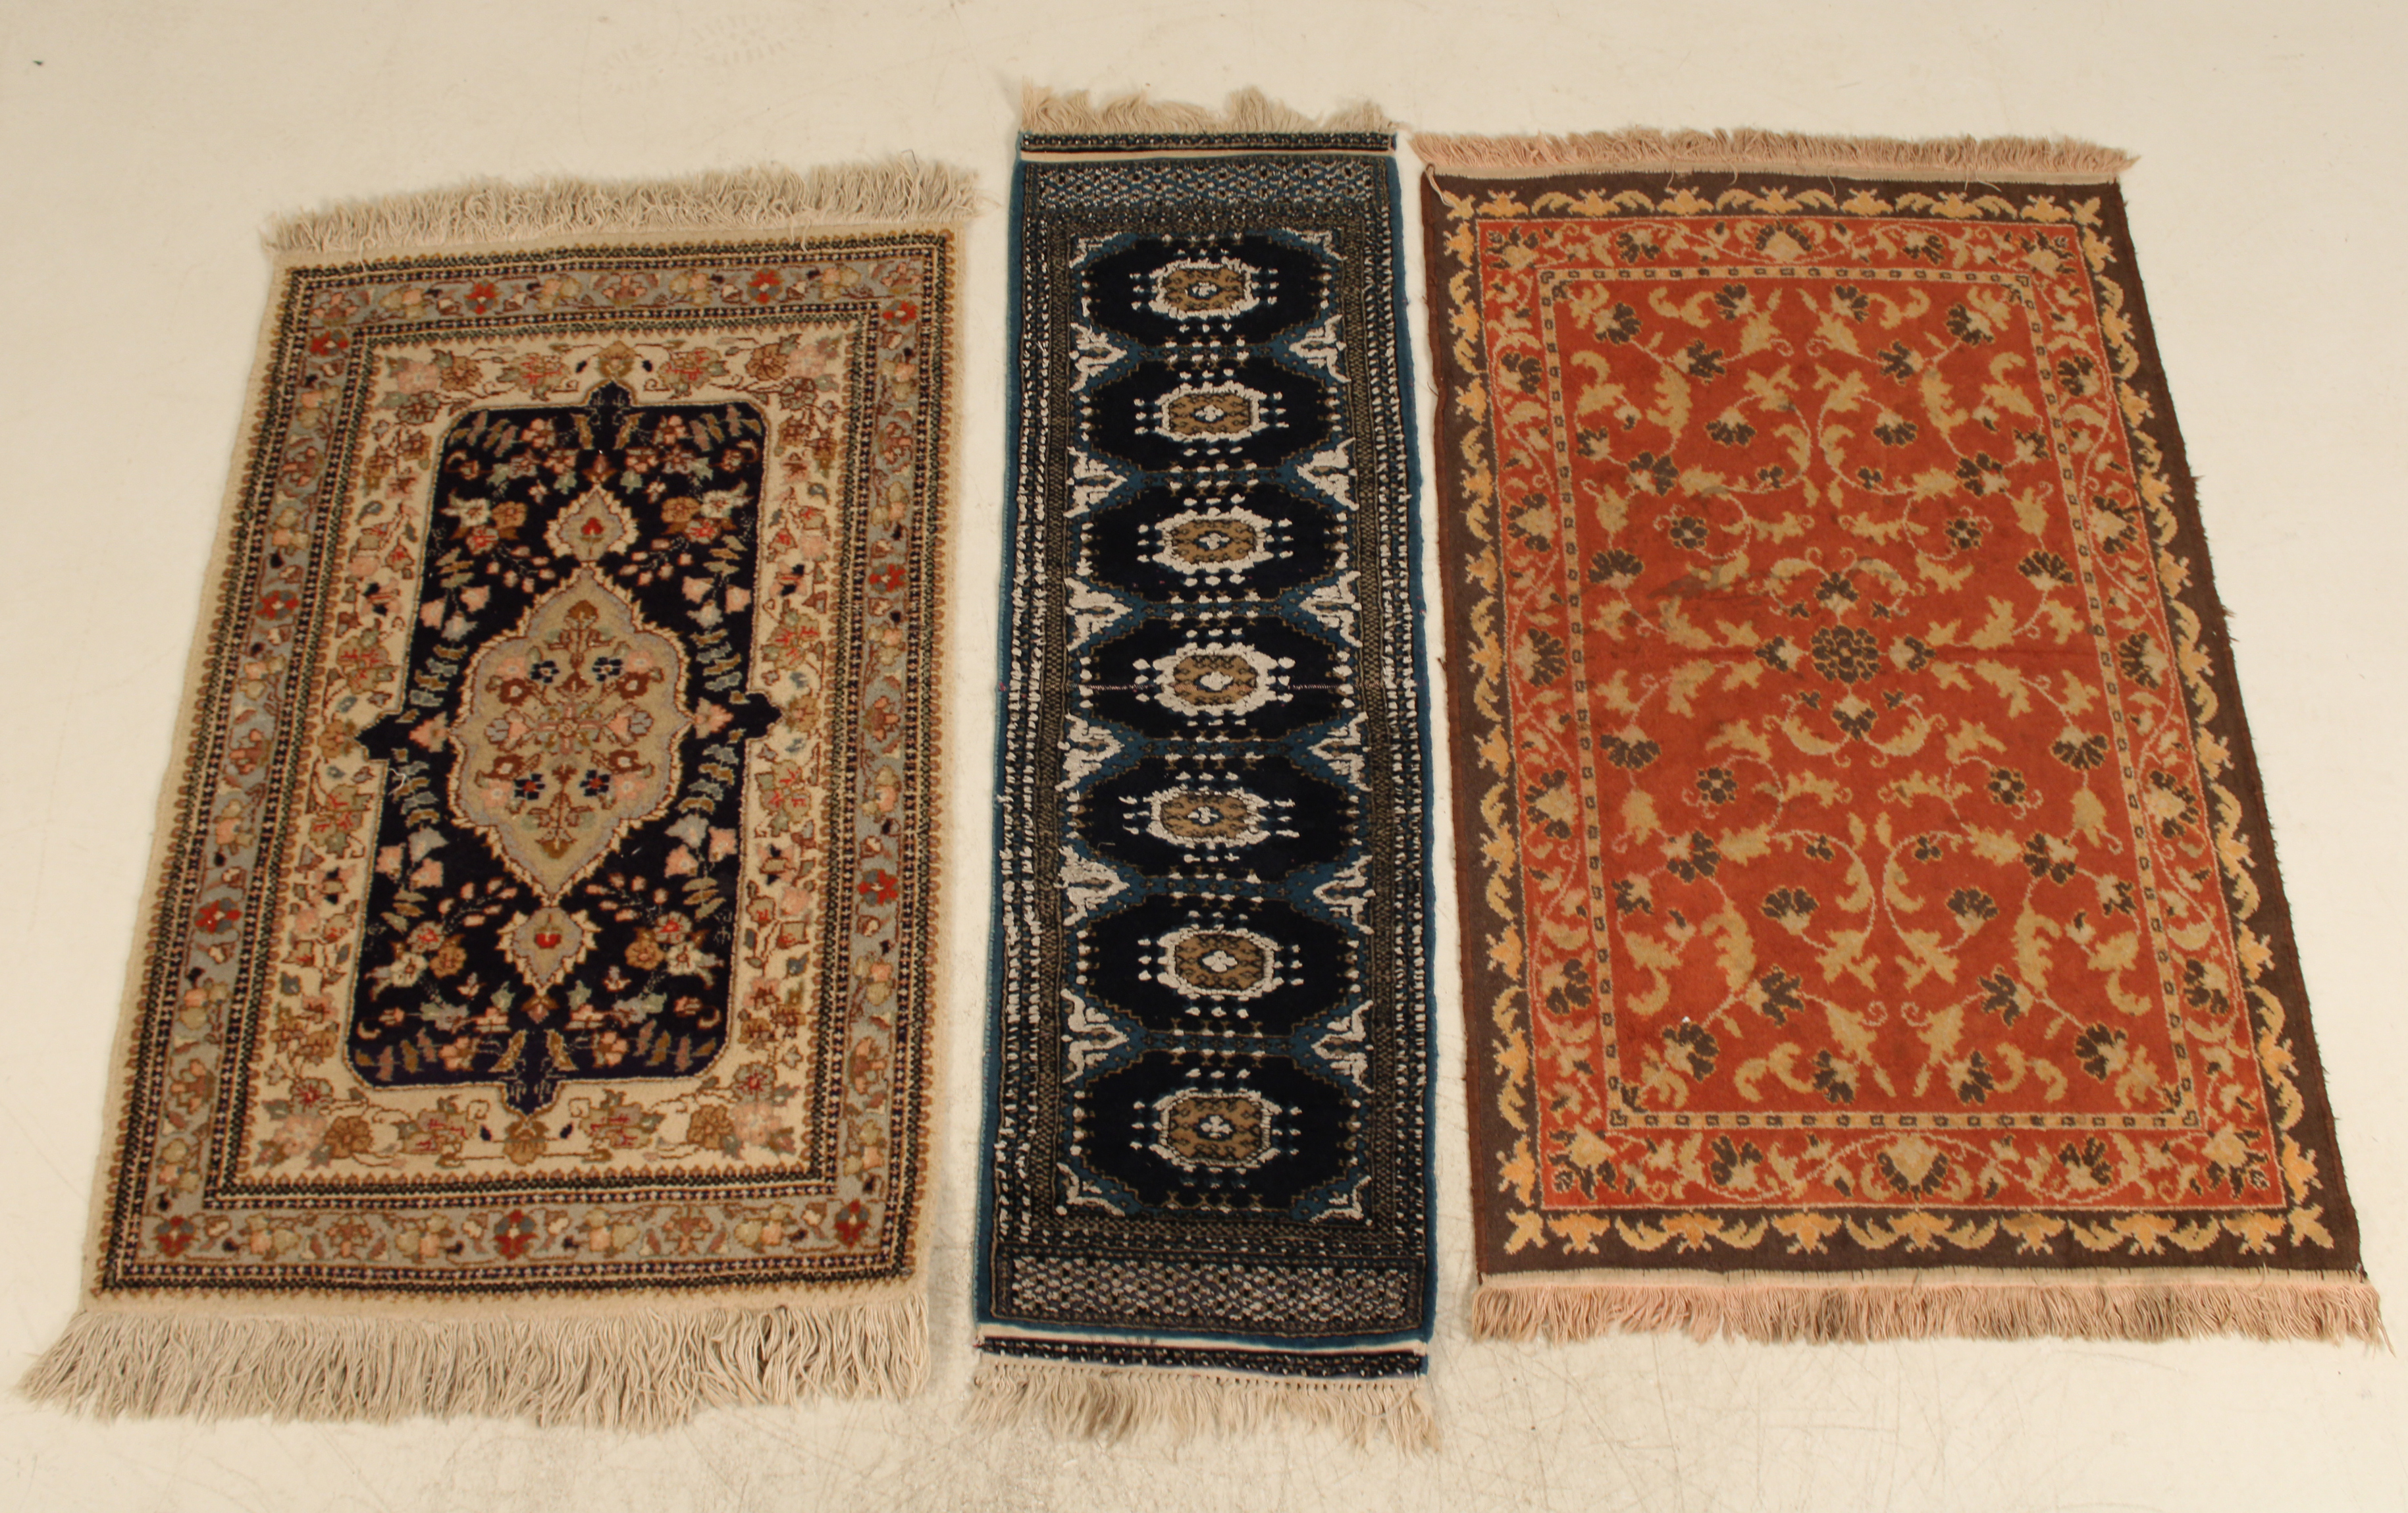 3 MISC PERSIAN SCATTER RUGS 3 35fc13